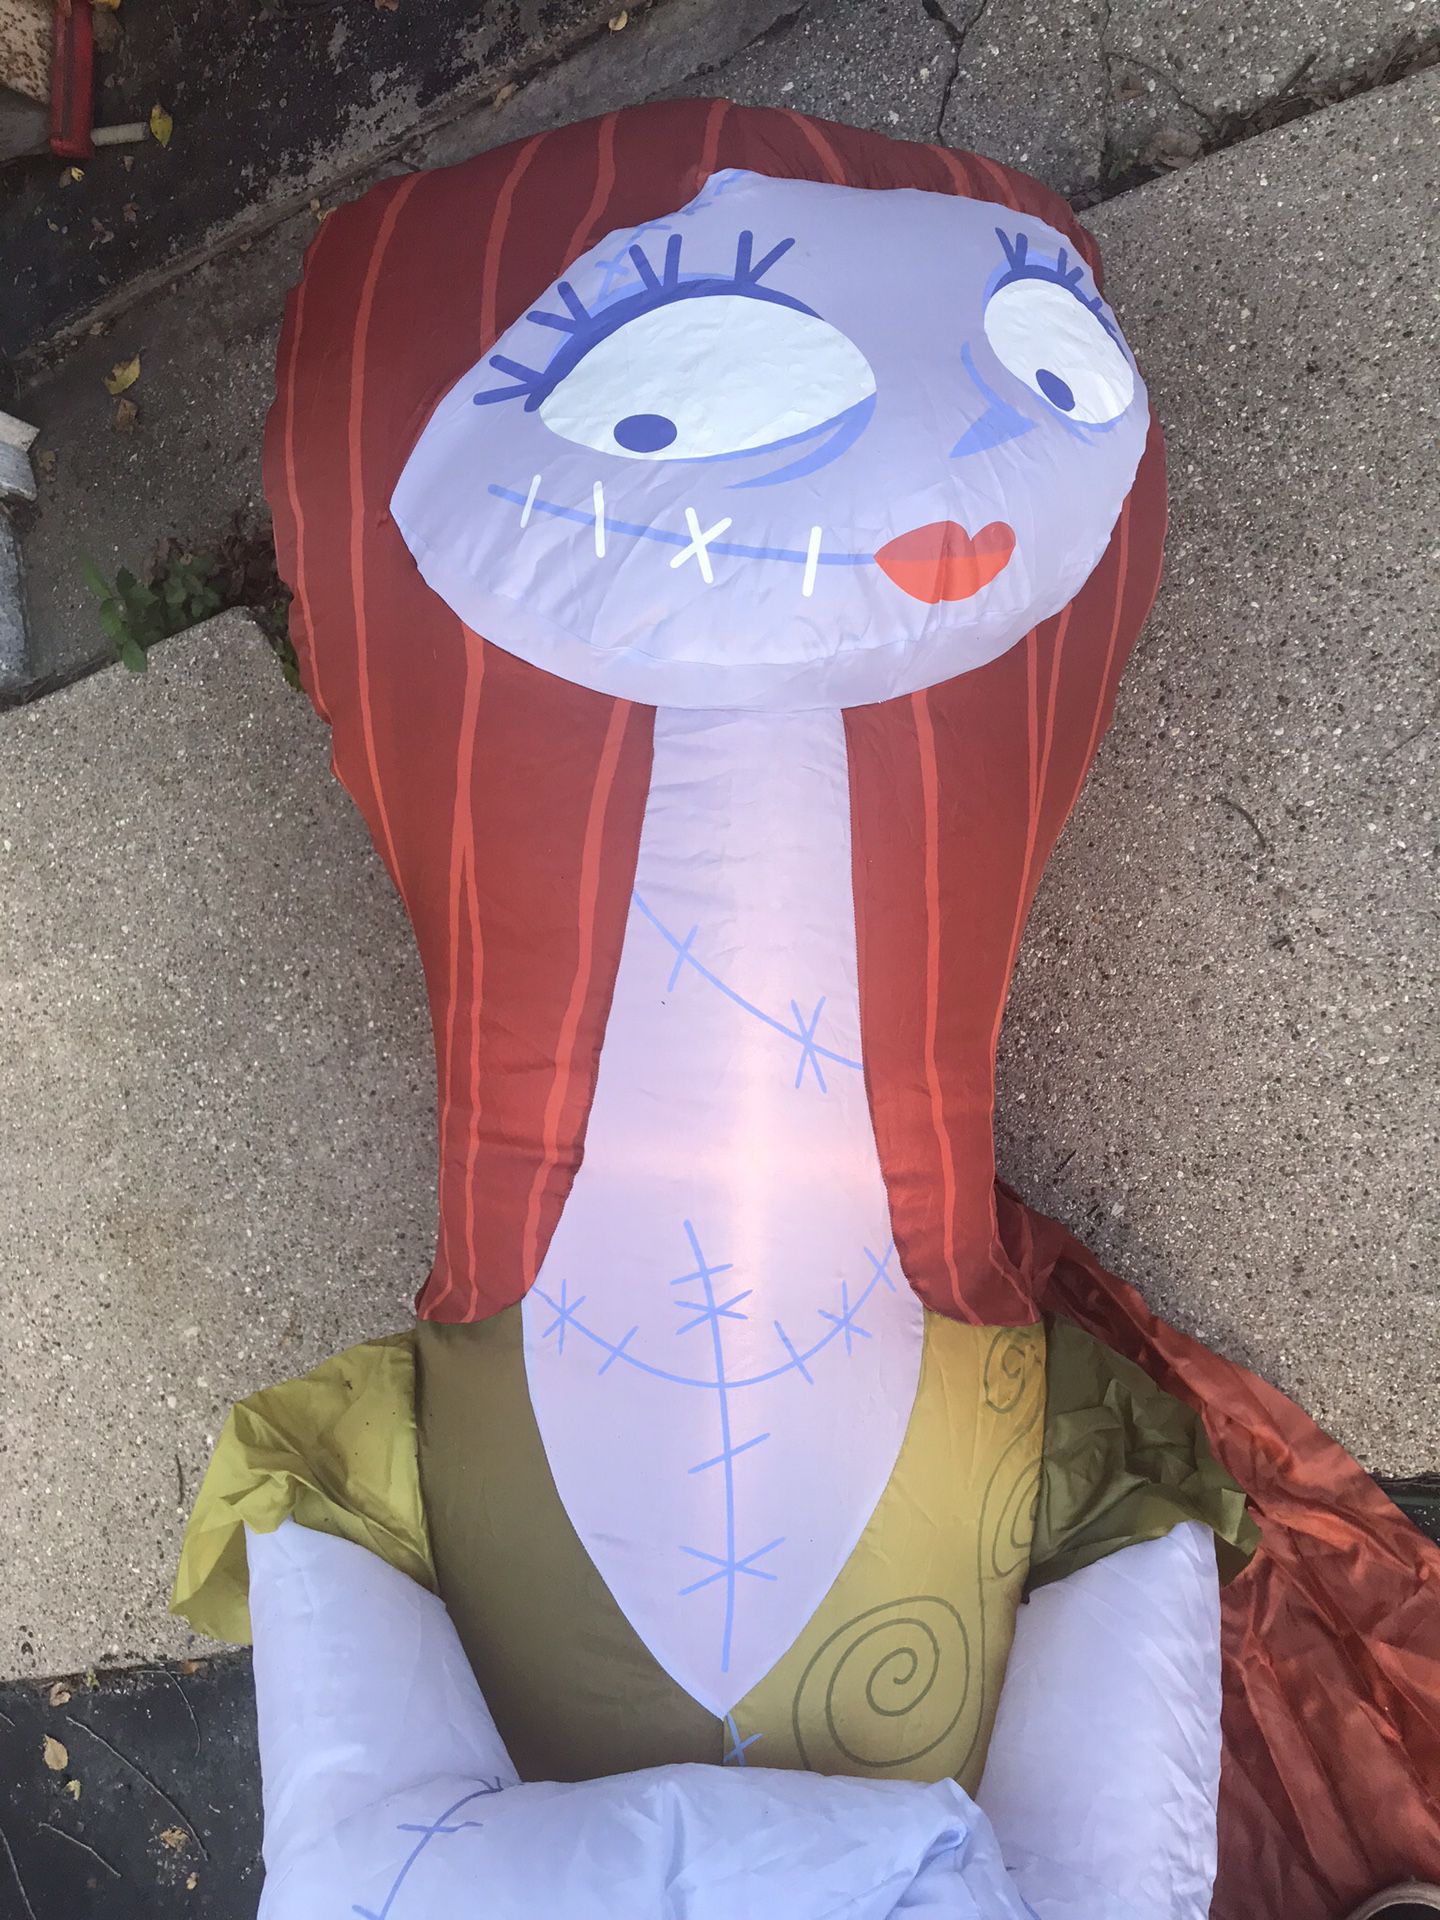 Sally from nightmare before Christmas inflatable